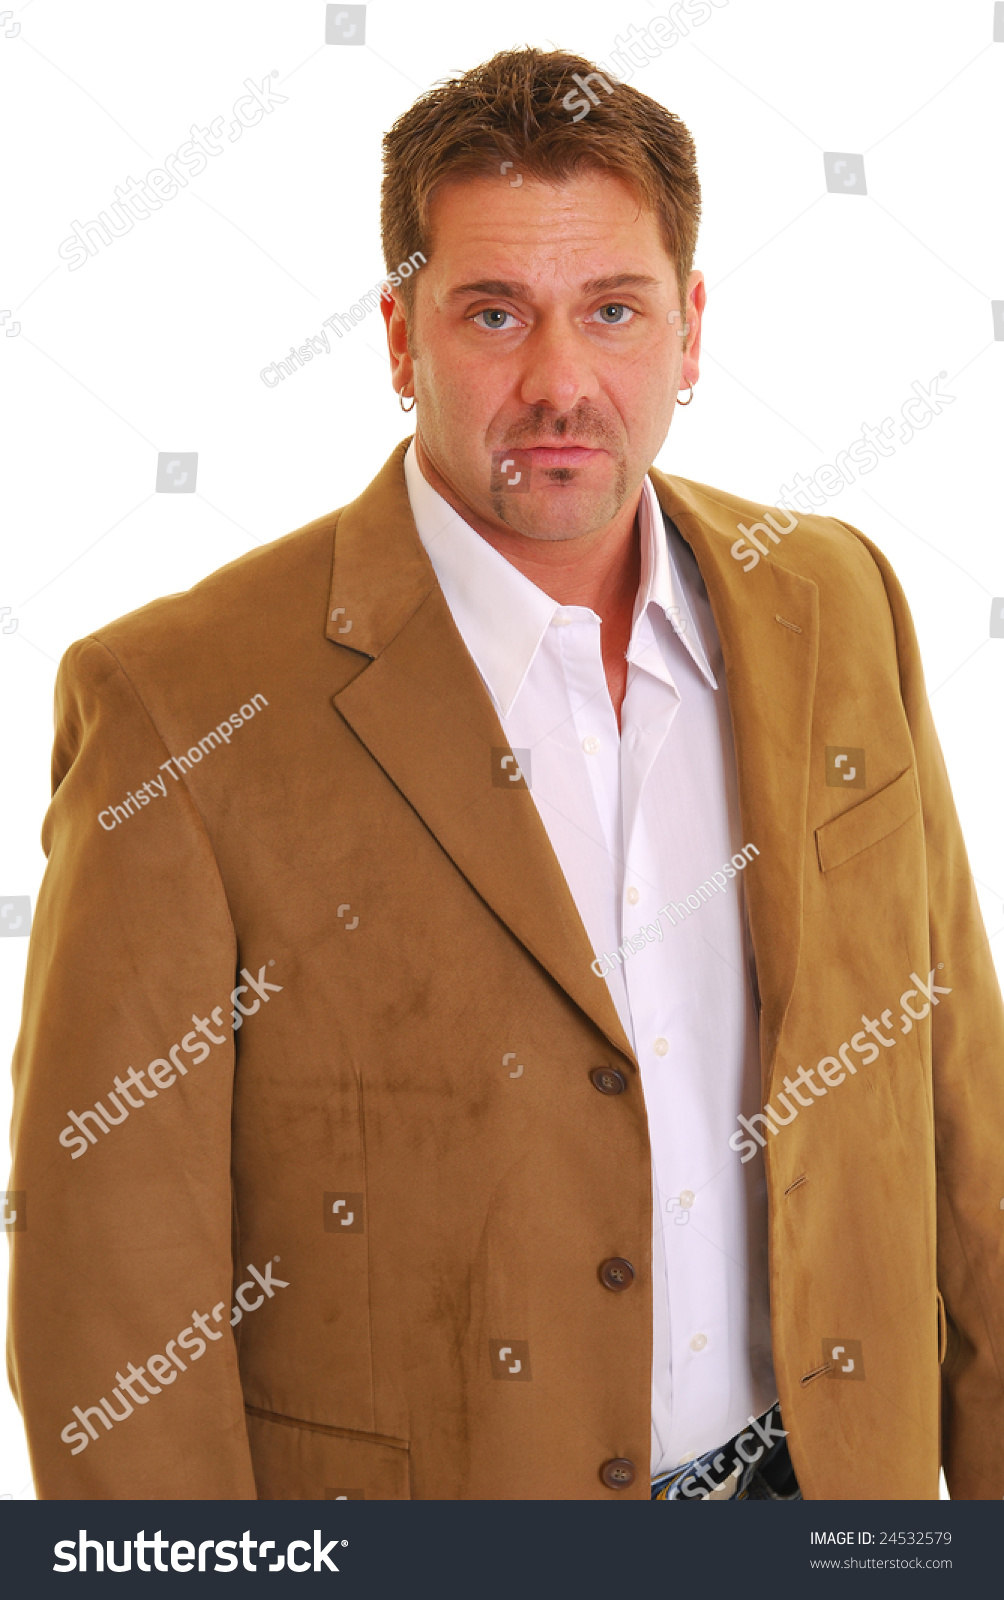 Casual Business Man Brown Suit Cot Stock Photo 24532579 - Shutterstock